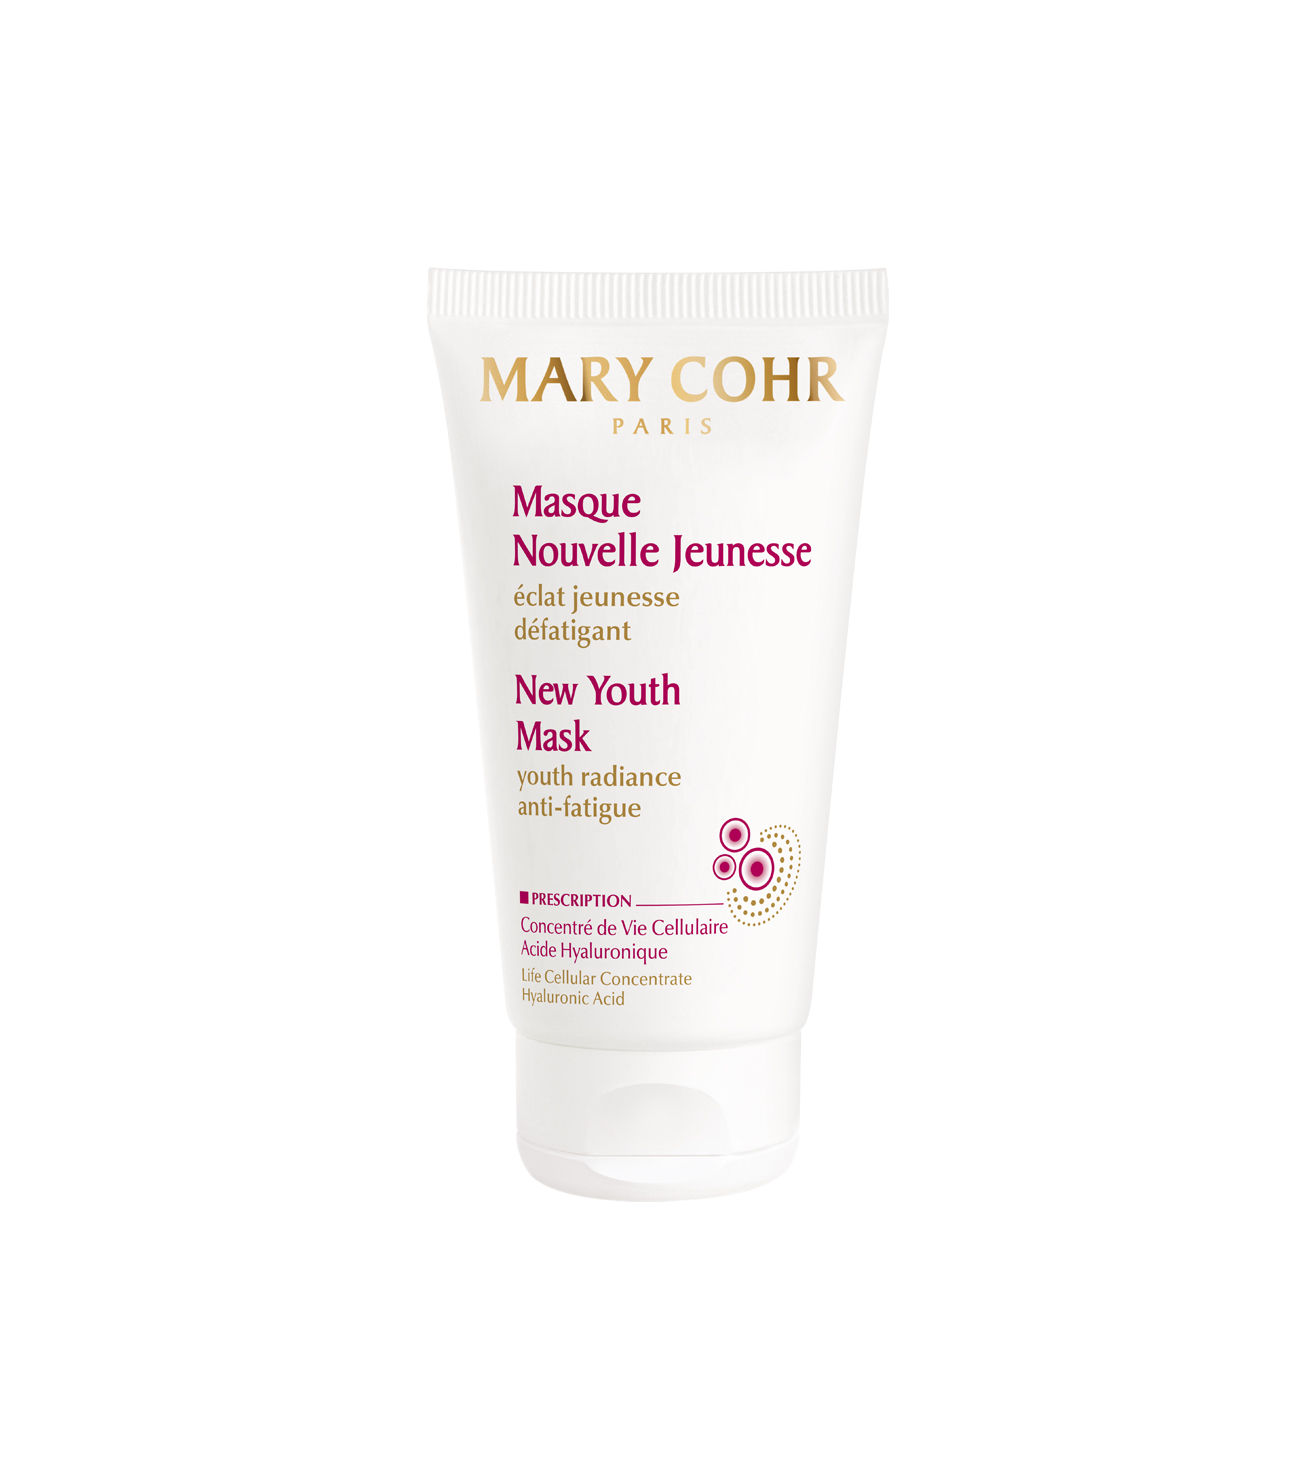 Mary Cohr Masque Nouvelle Jeunesse - New Youth Mask